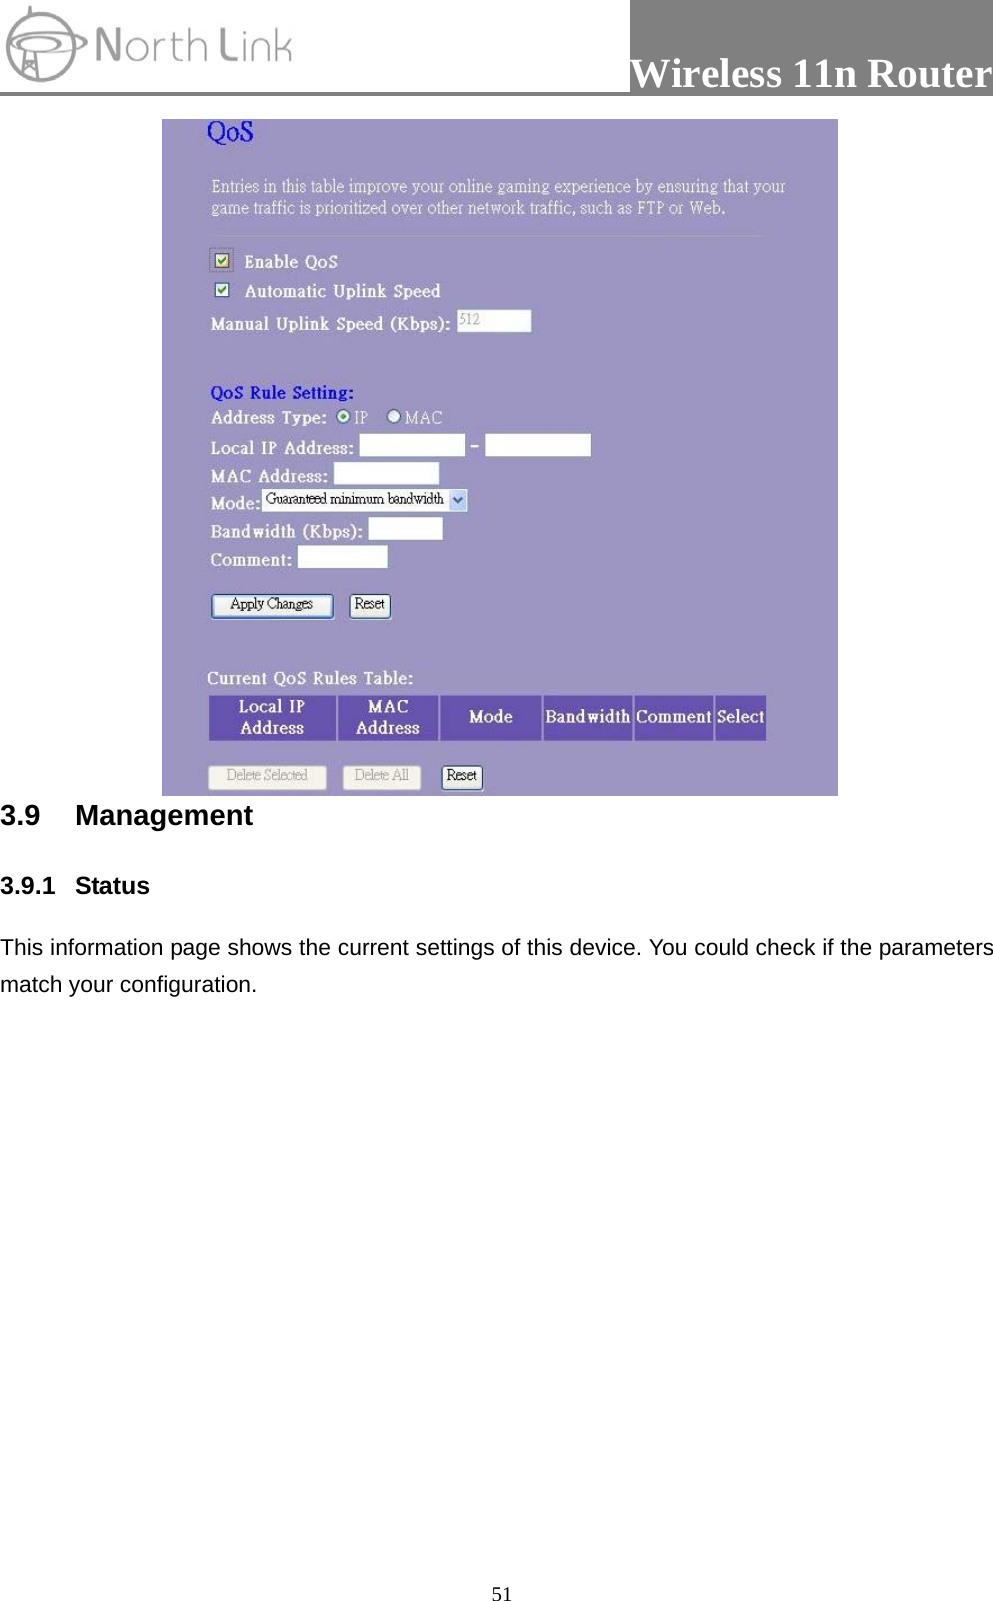                 Wireless 11n Router   51 3.9 Management  3.9.1 Status   This information page shows the current settings of this device. You could check if the parameters match your configuration.   